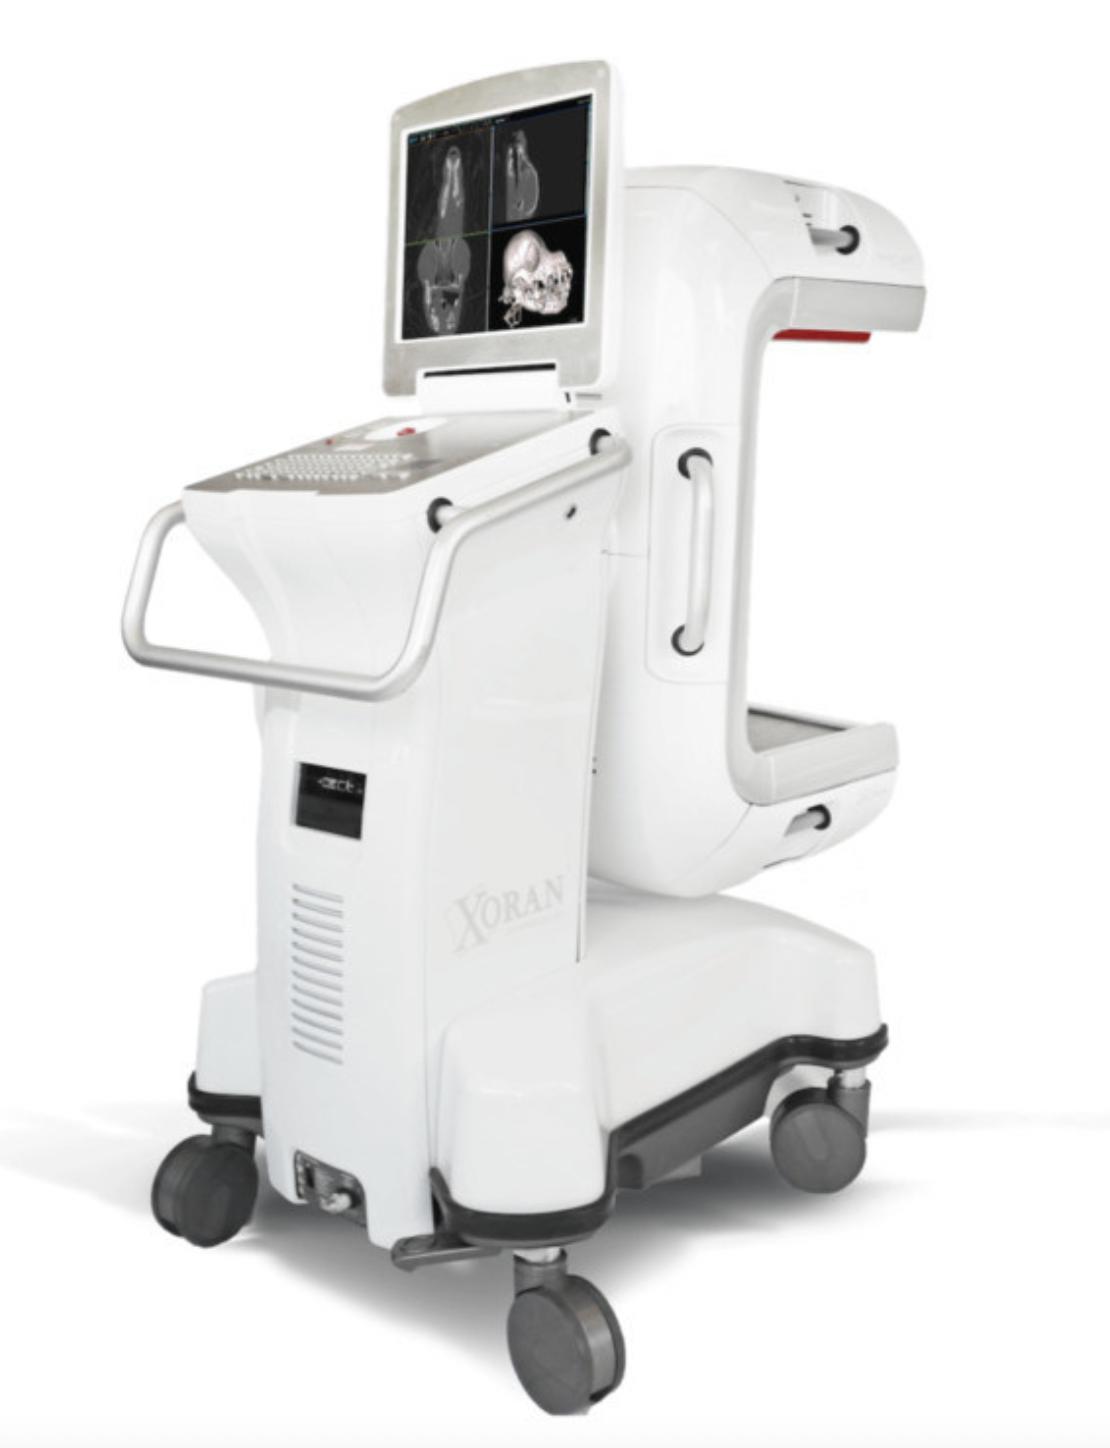 Credit: Xoran Technologies

The VetCAT IQ™ is a compact, truly mobile 3D cone beam computed tomography system that brings imaging directly to the patient.